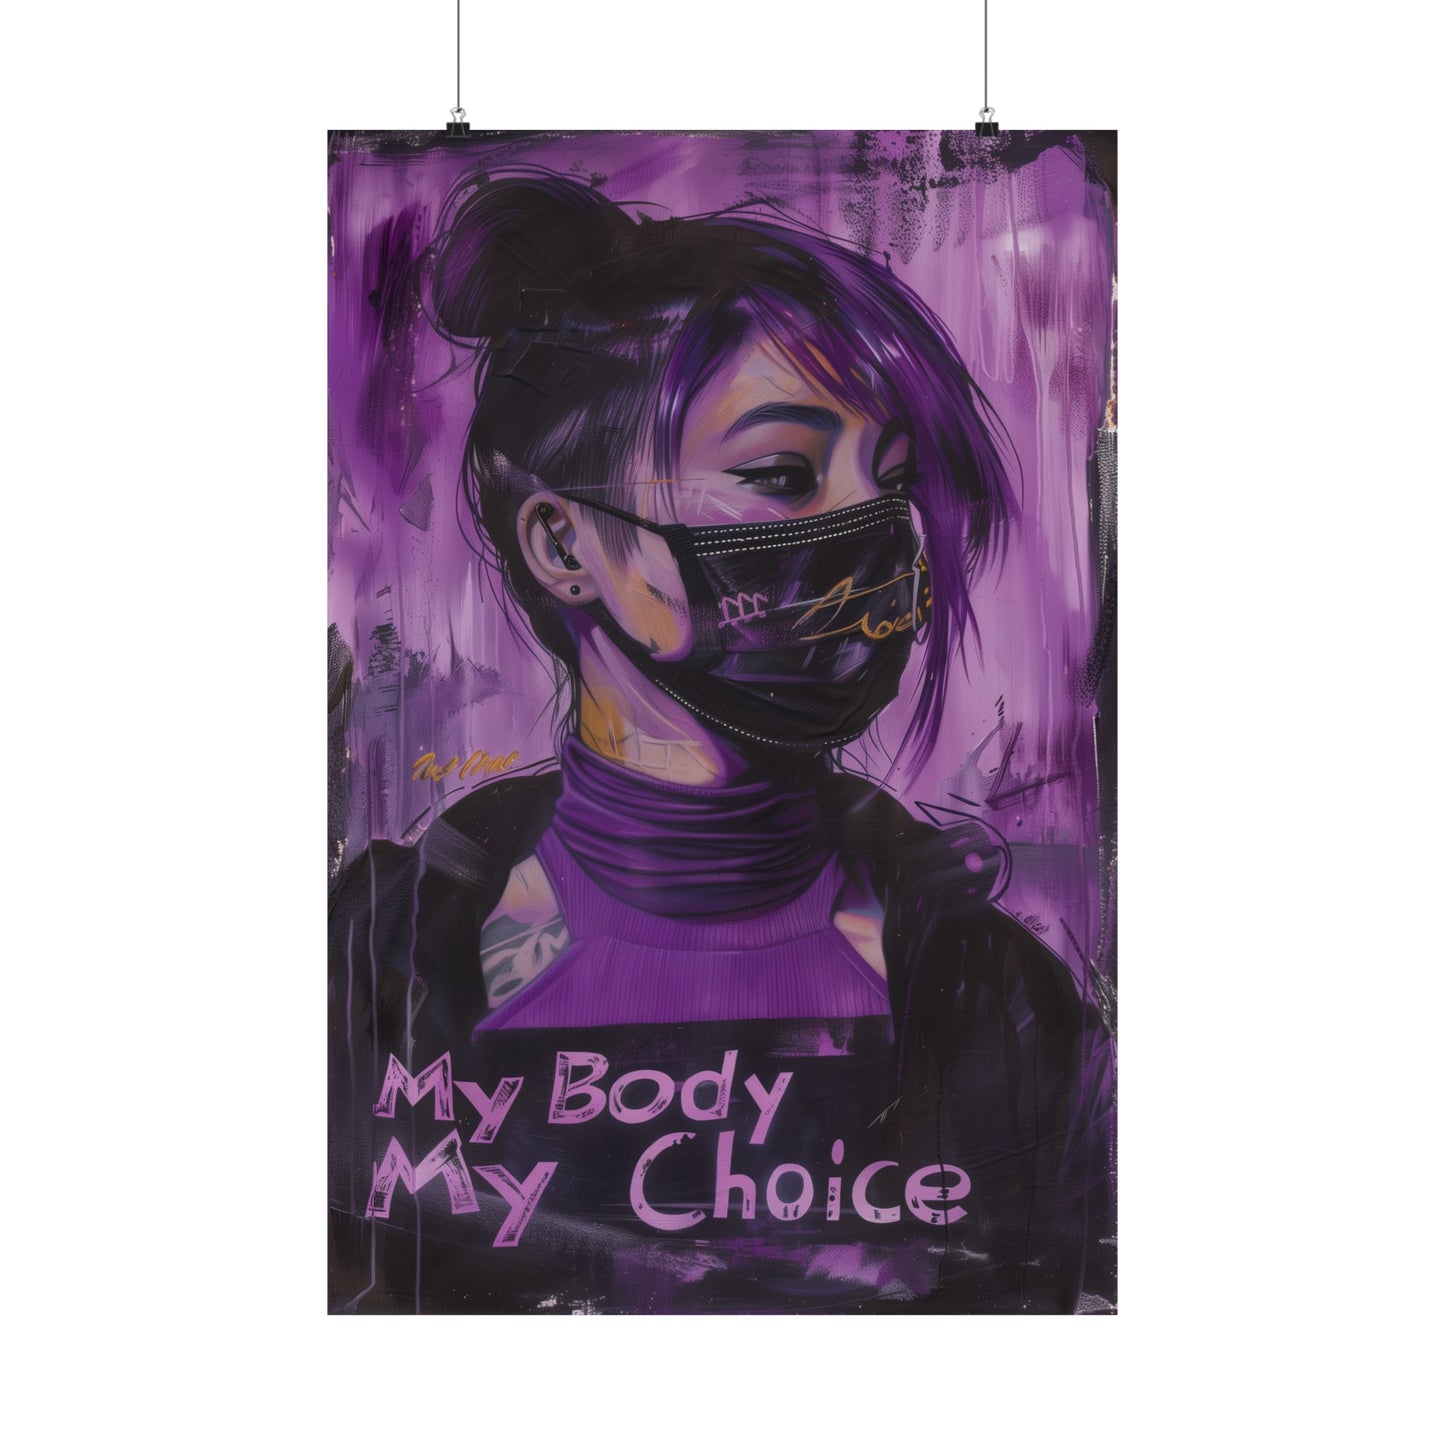 My Body My Choice Cyberpunk Matte Poster Women's Rights Reproductive Rights Demand Respect and Demand Equality!